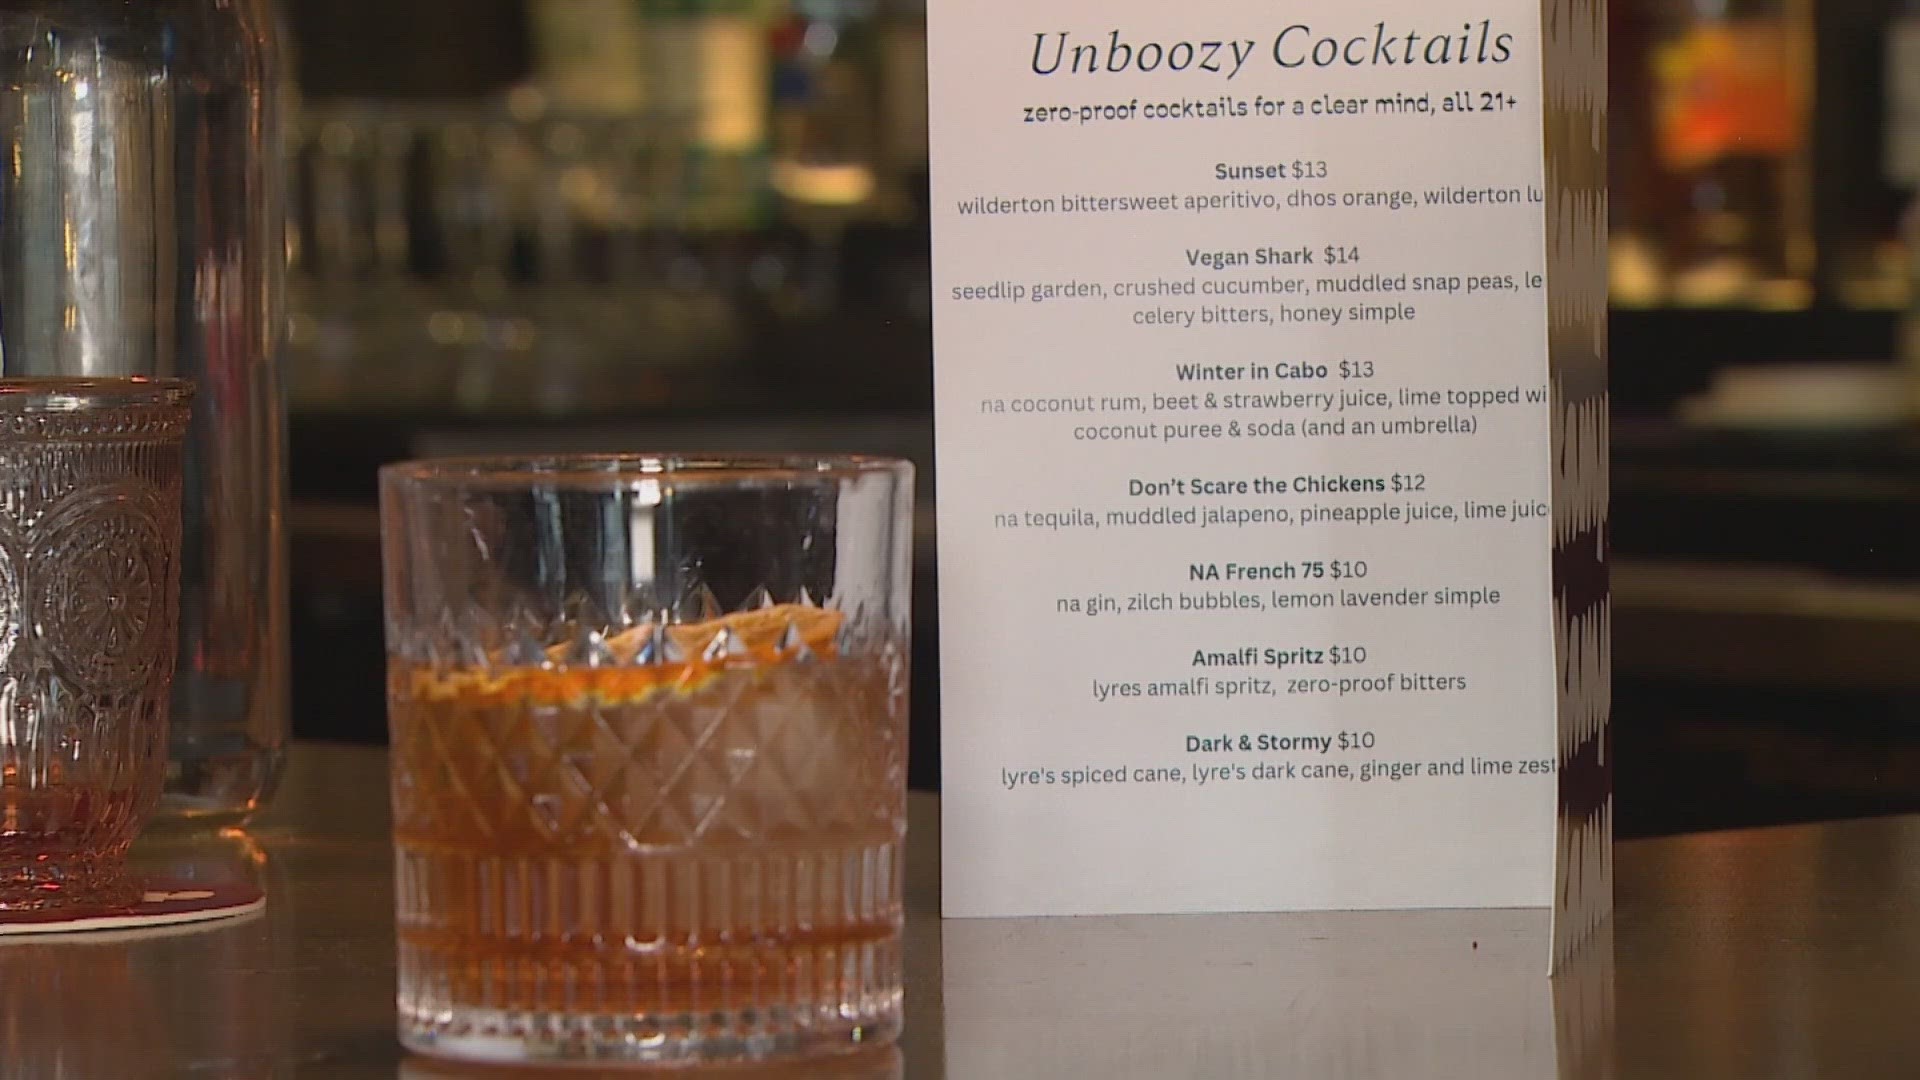 Many Seattle restaurants and bars are embracing a new trend towards booze-free cocktails